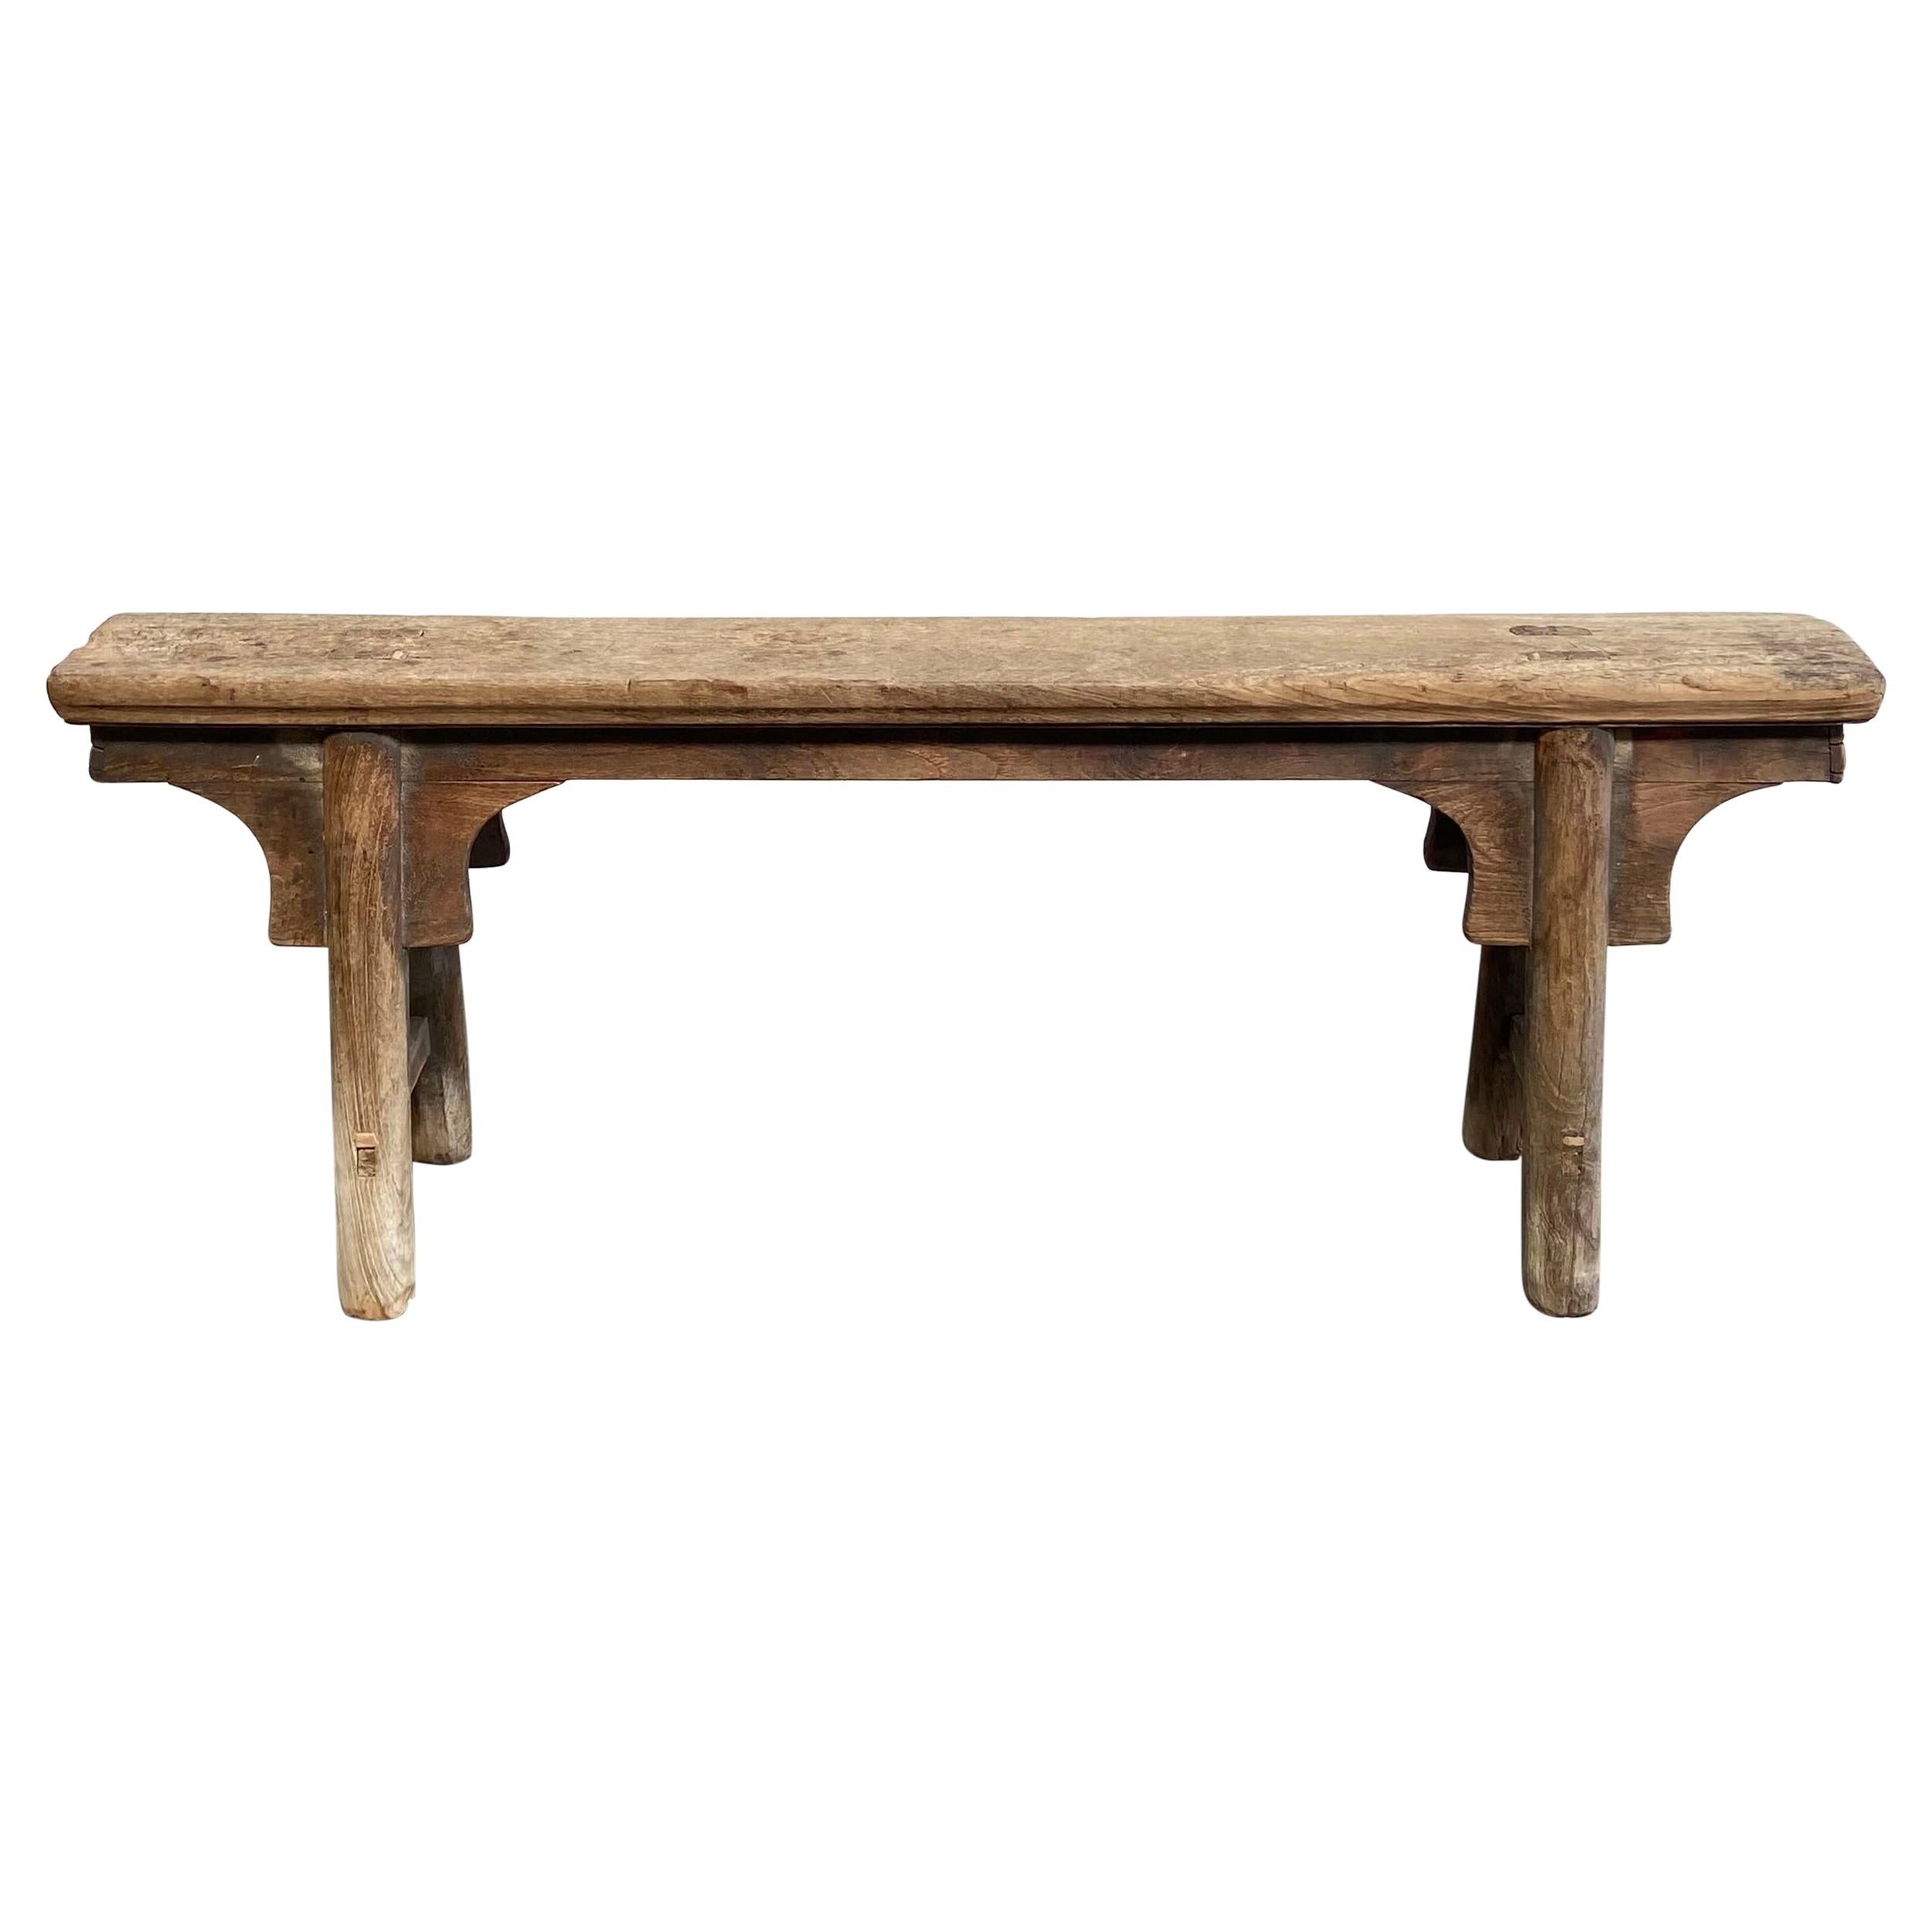 Antique Asian Style Elm Wood Bench